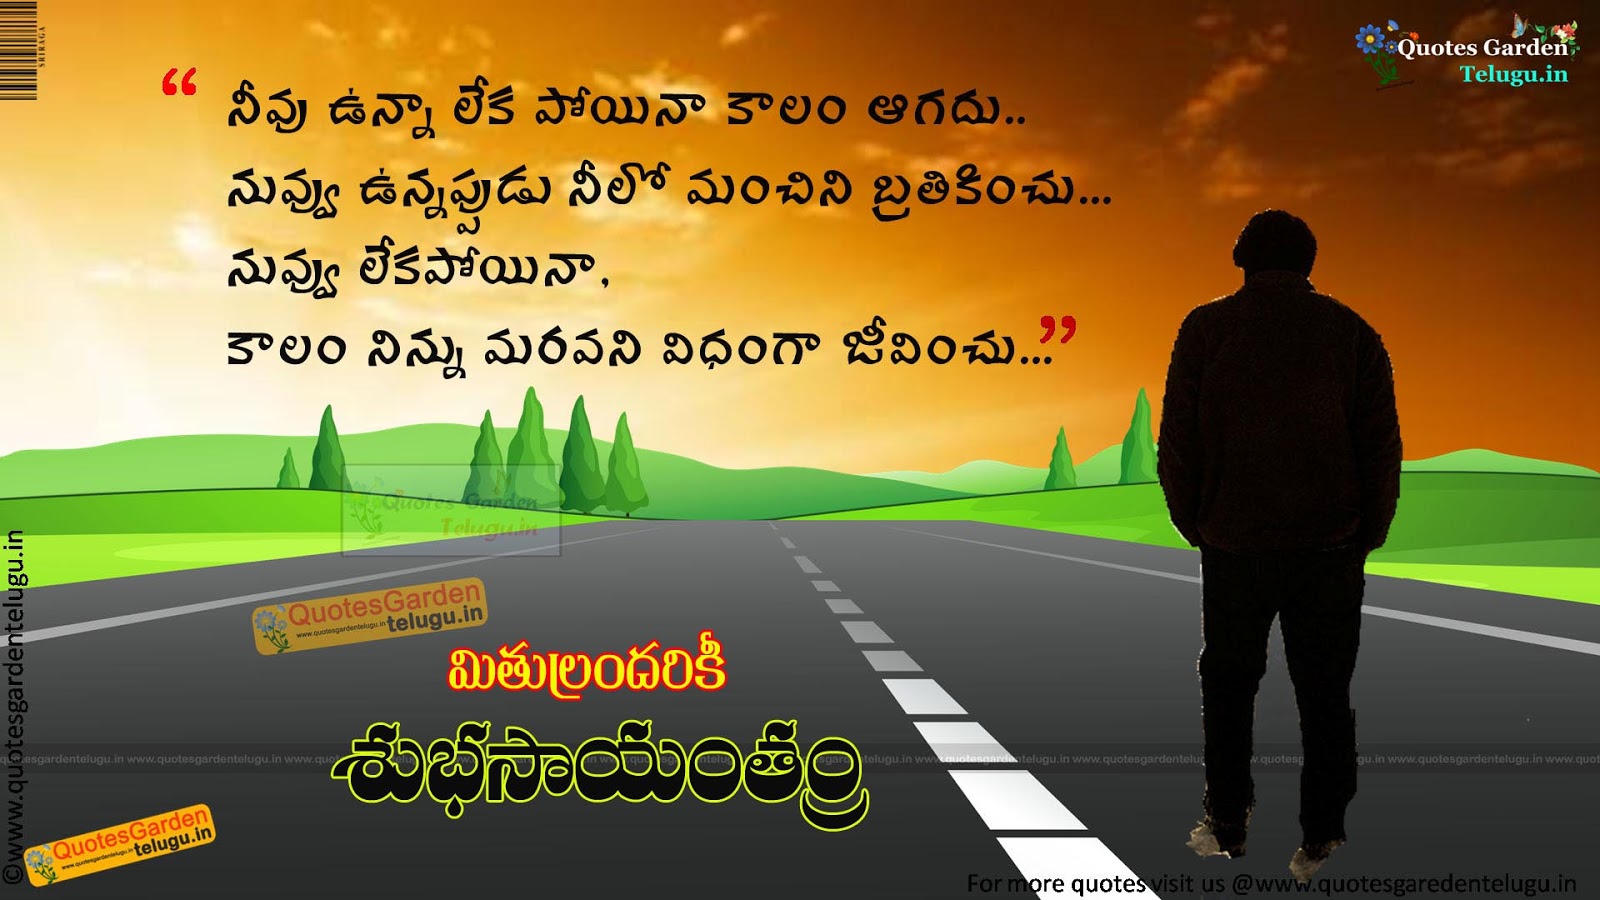 Heart touching good evening quotes in telugu 1163  QUOTES 